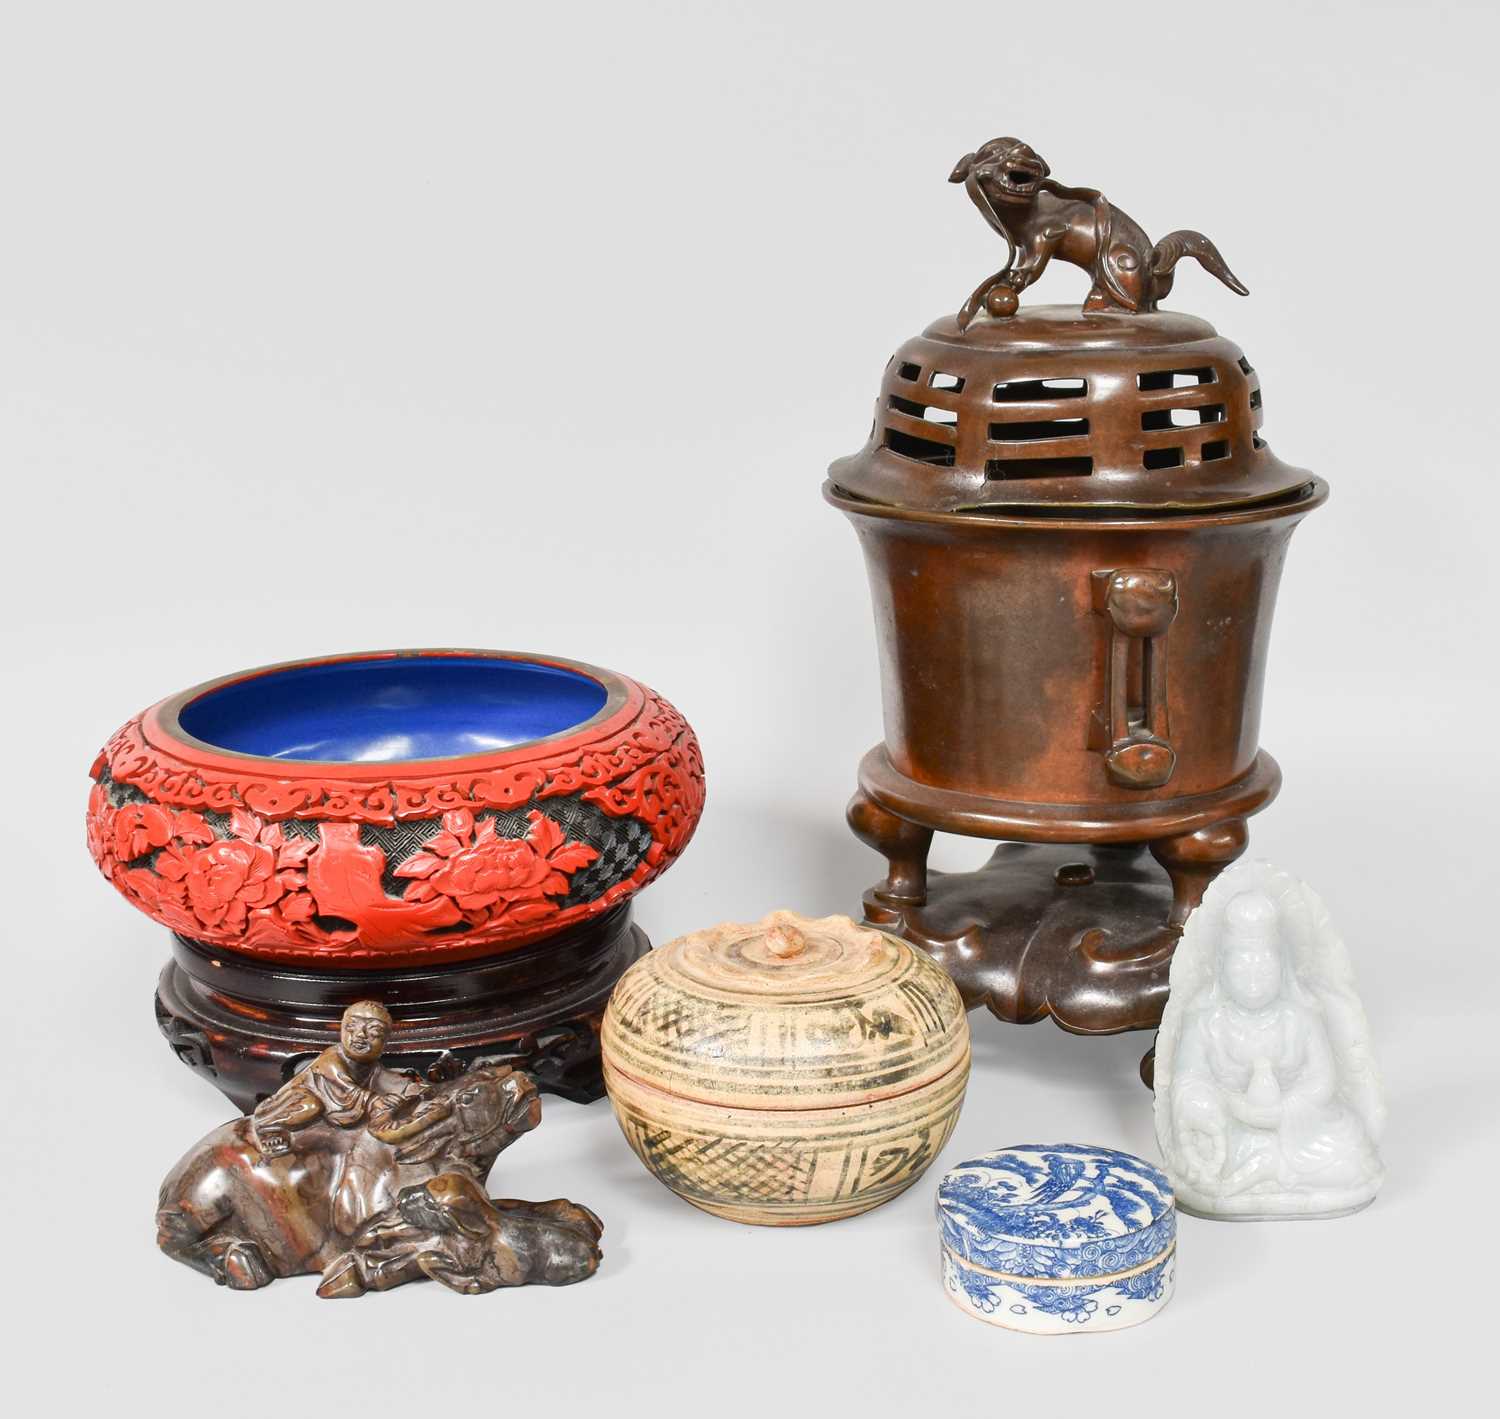 A Group of Asian Art, including a Chinese celadon jade carving of Guanyin seated, a carved soapstone